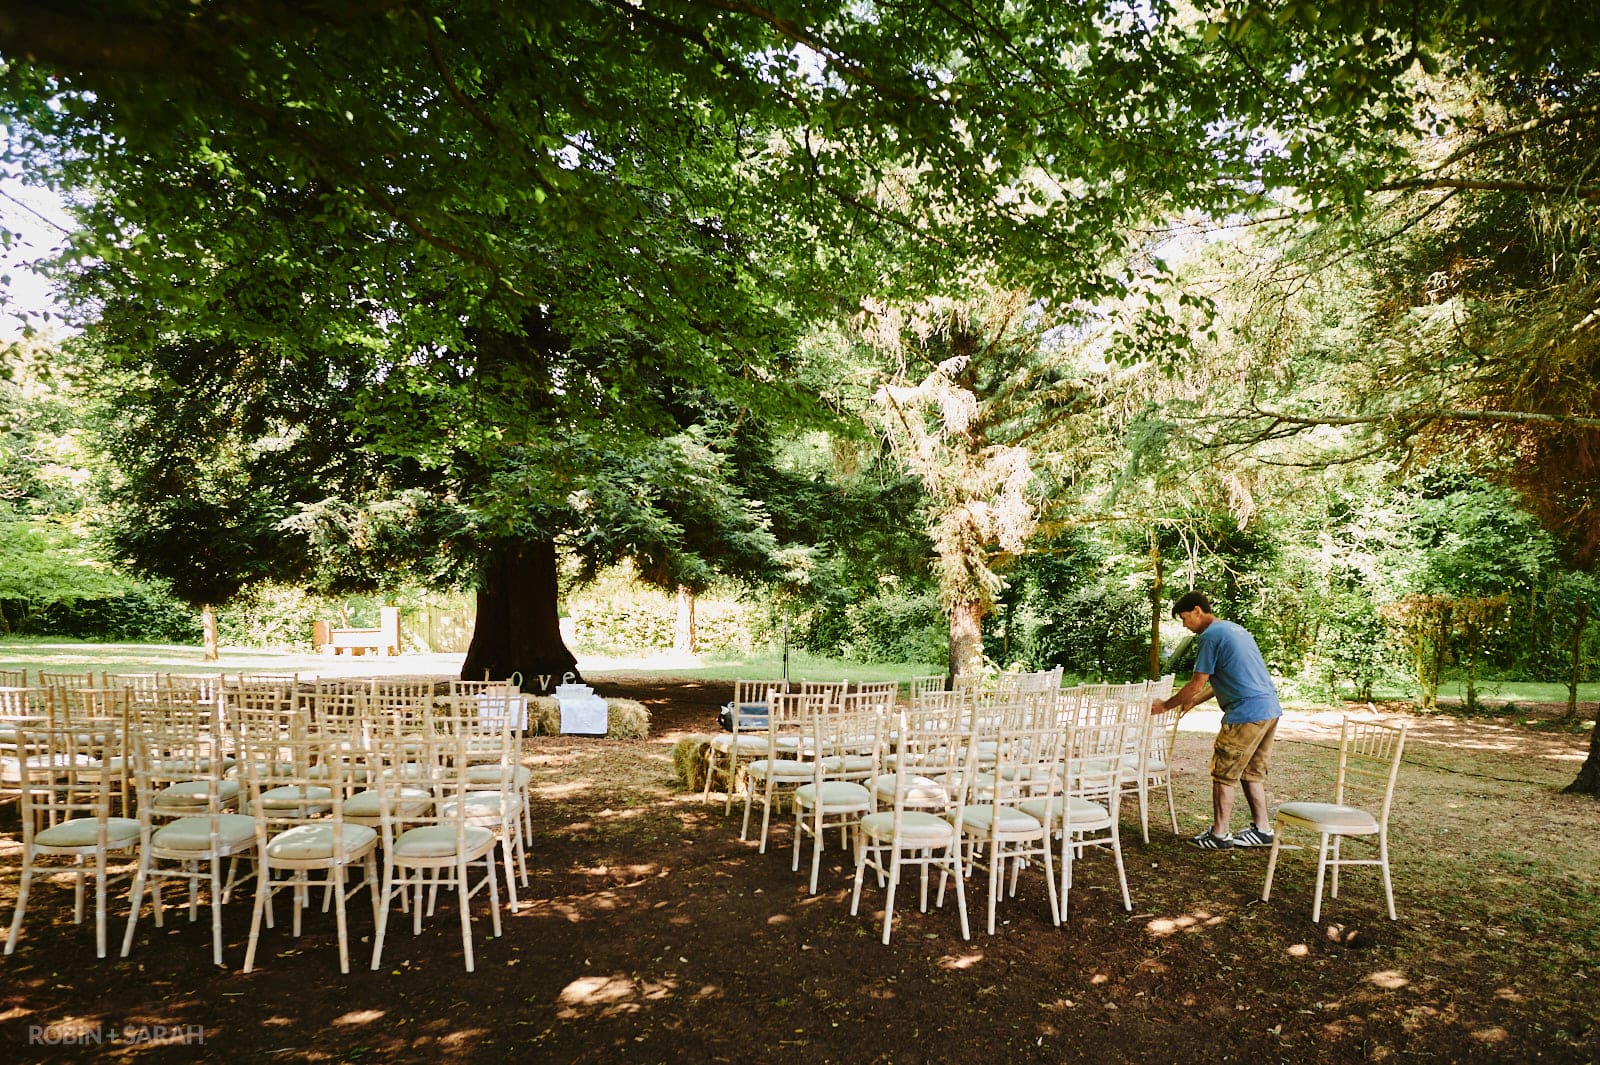 Groom sets out chairs for wedding ceremony under large tree